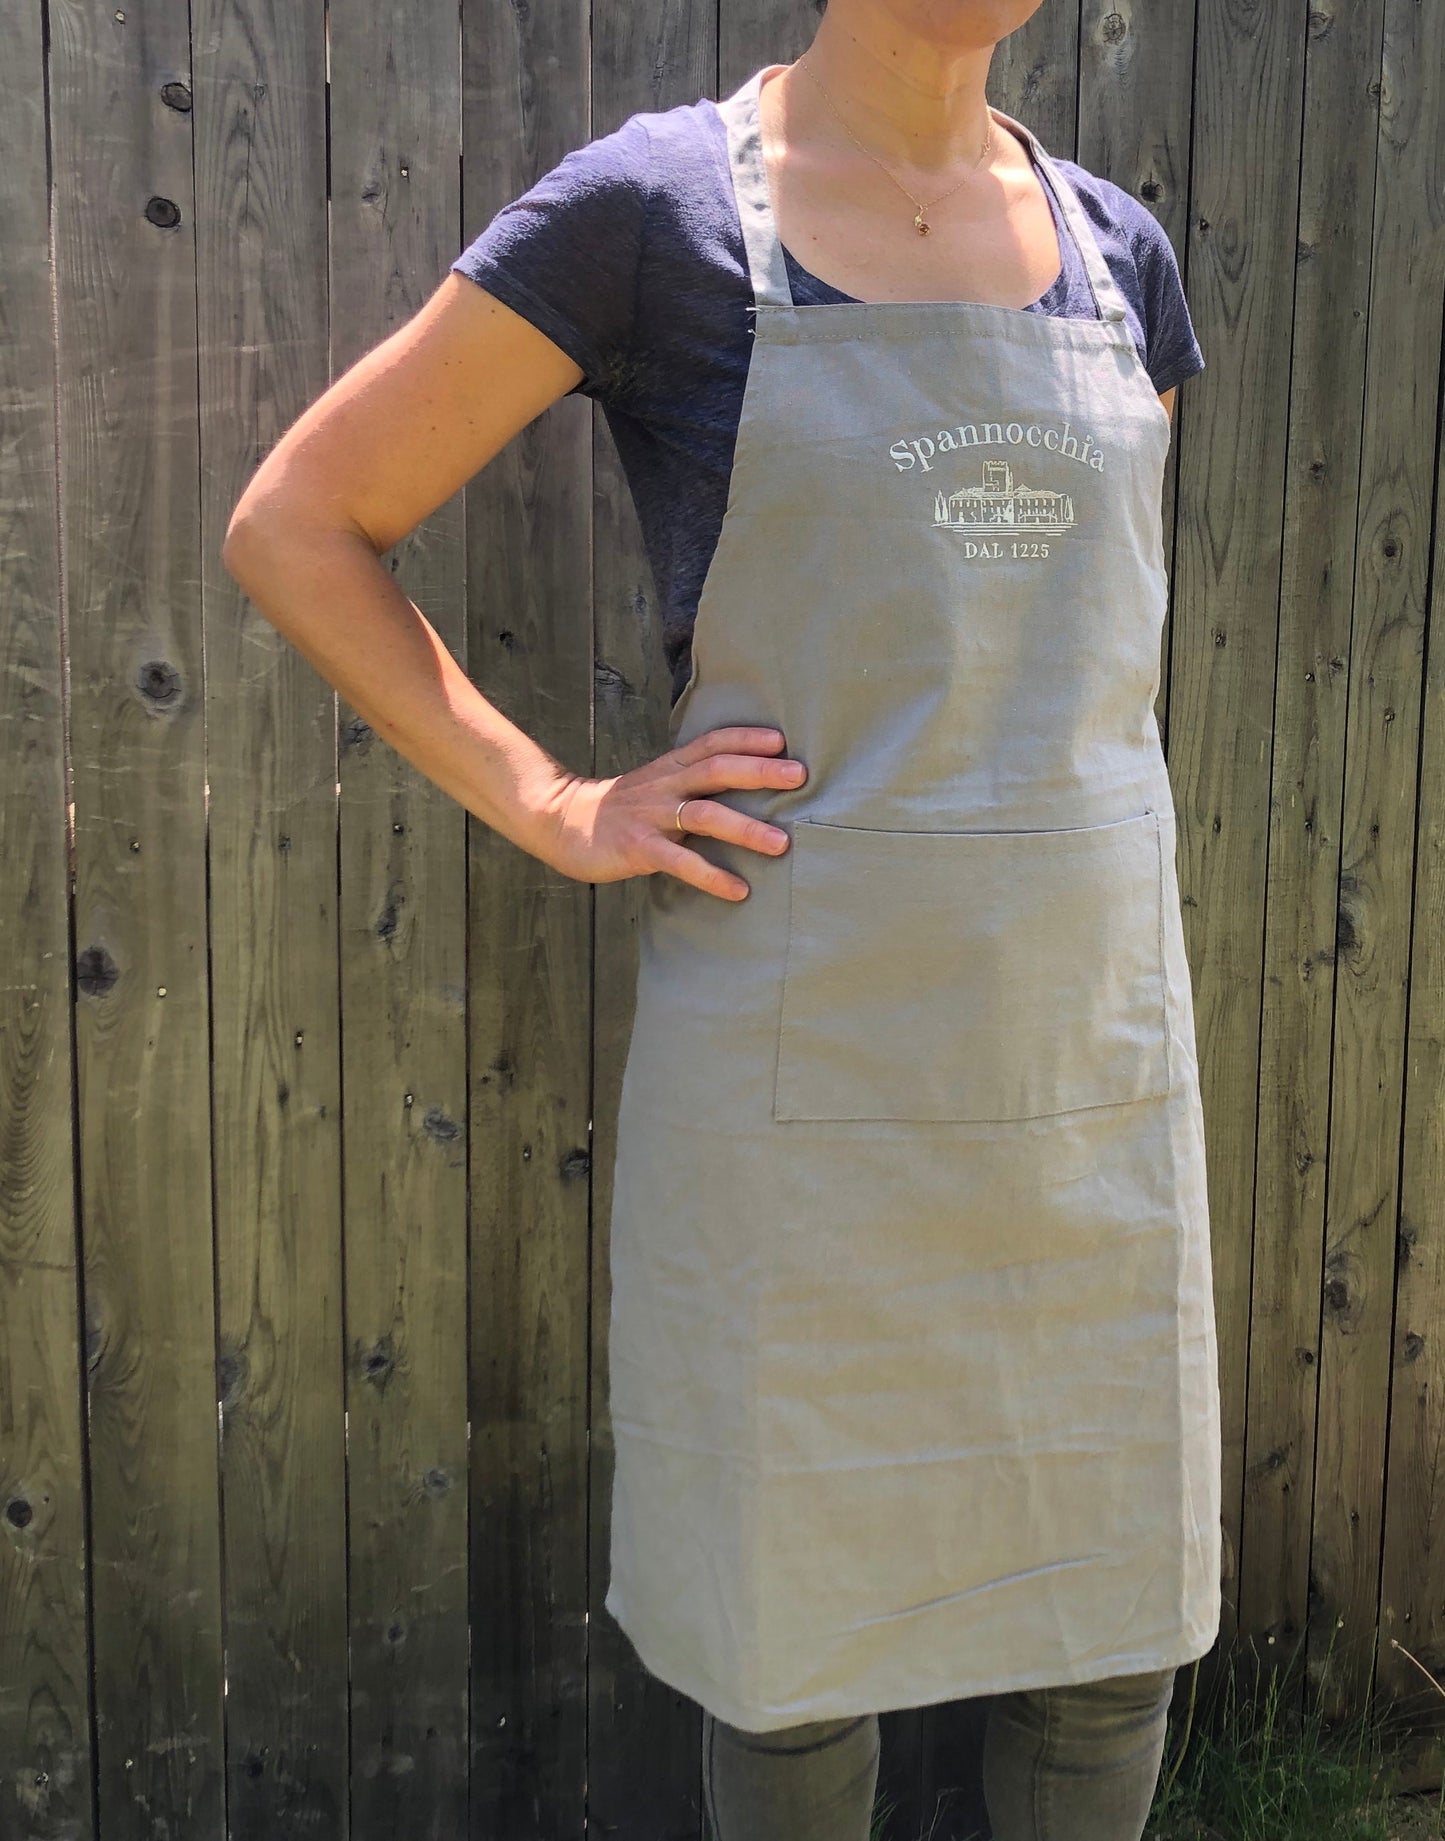 Gray apron on person